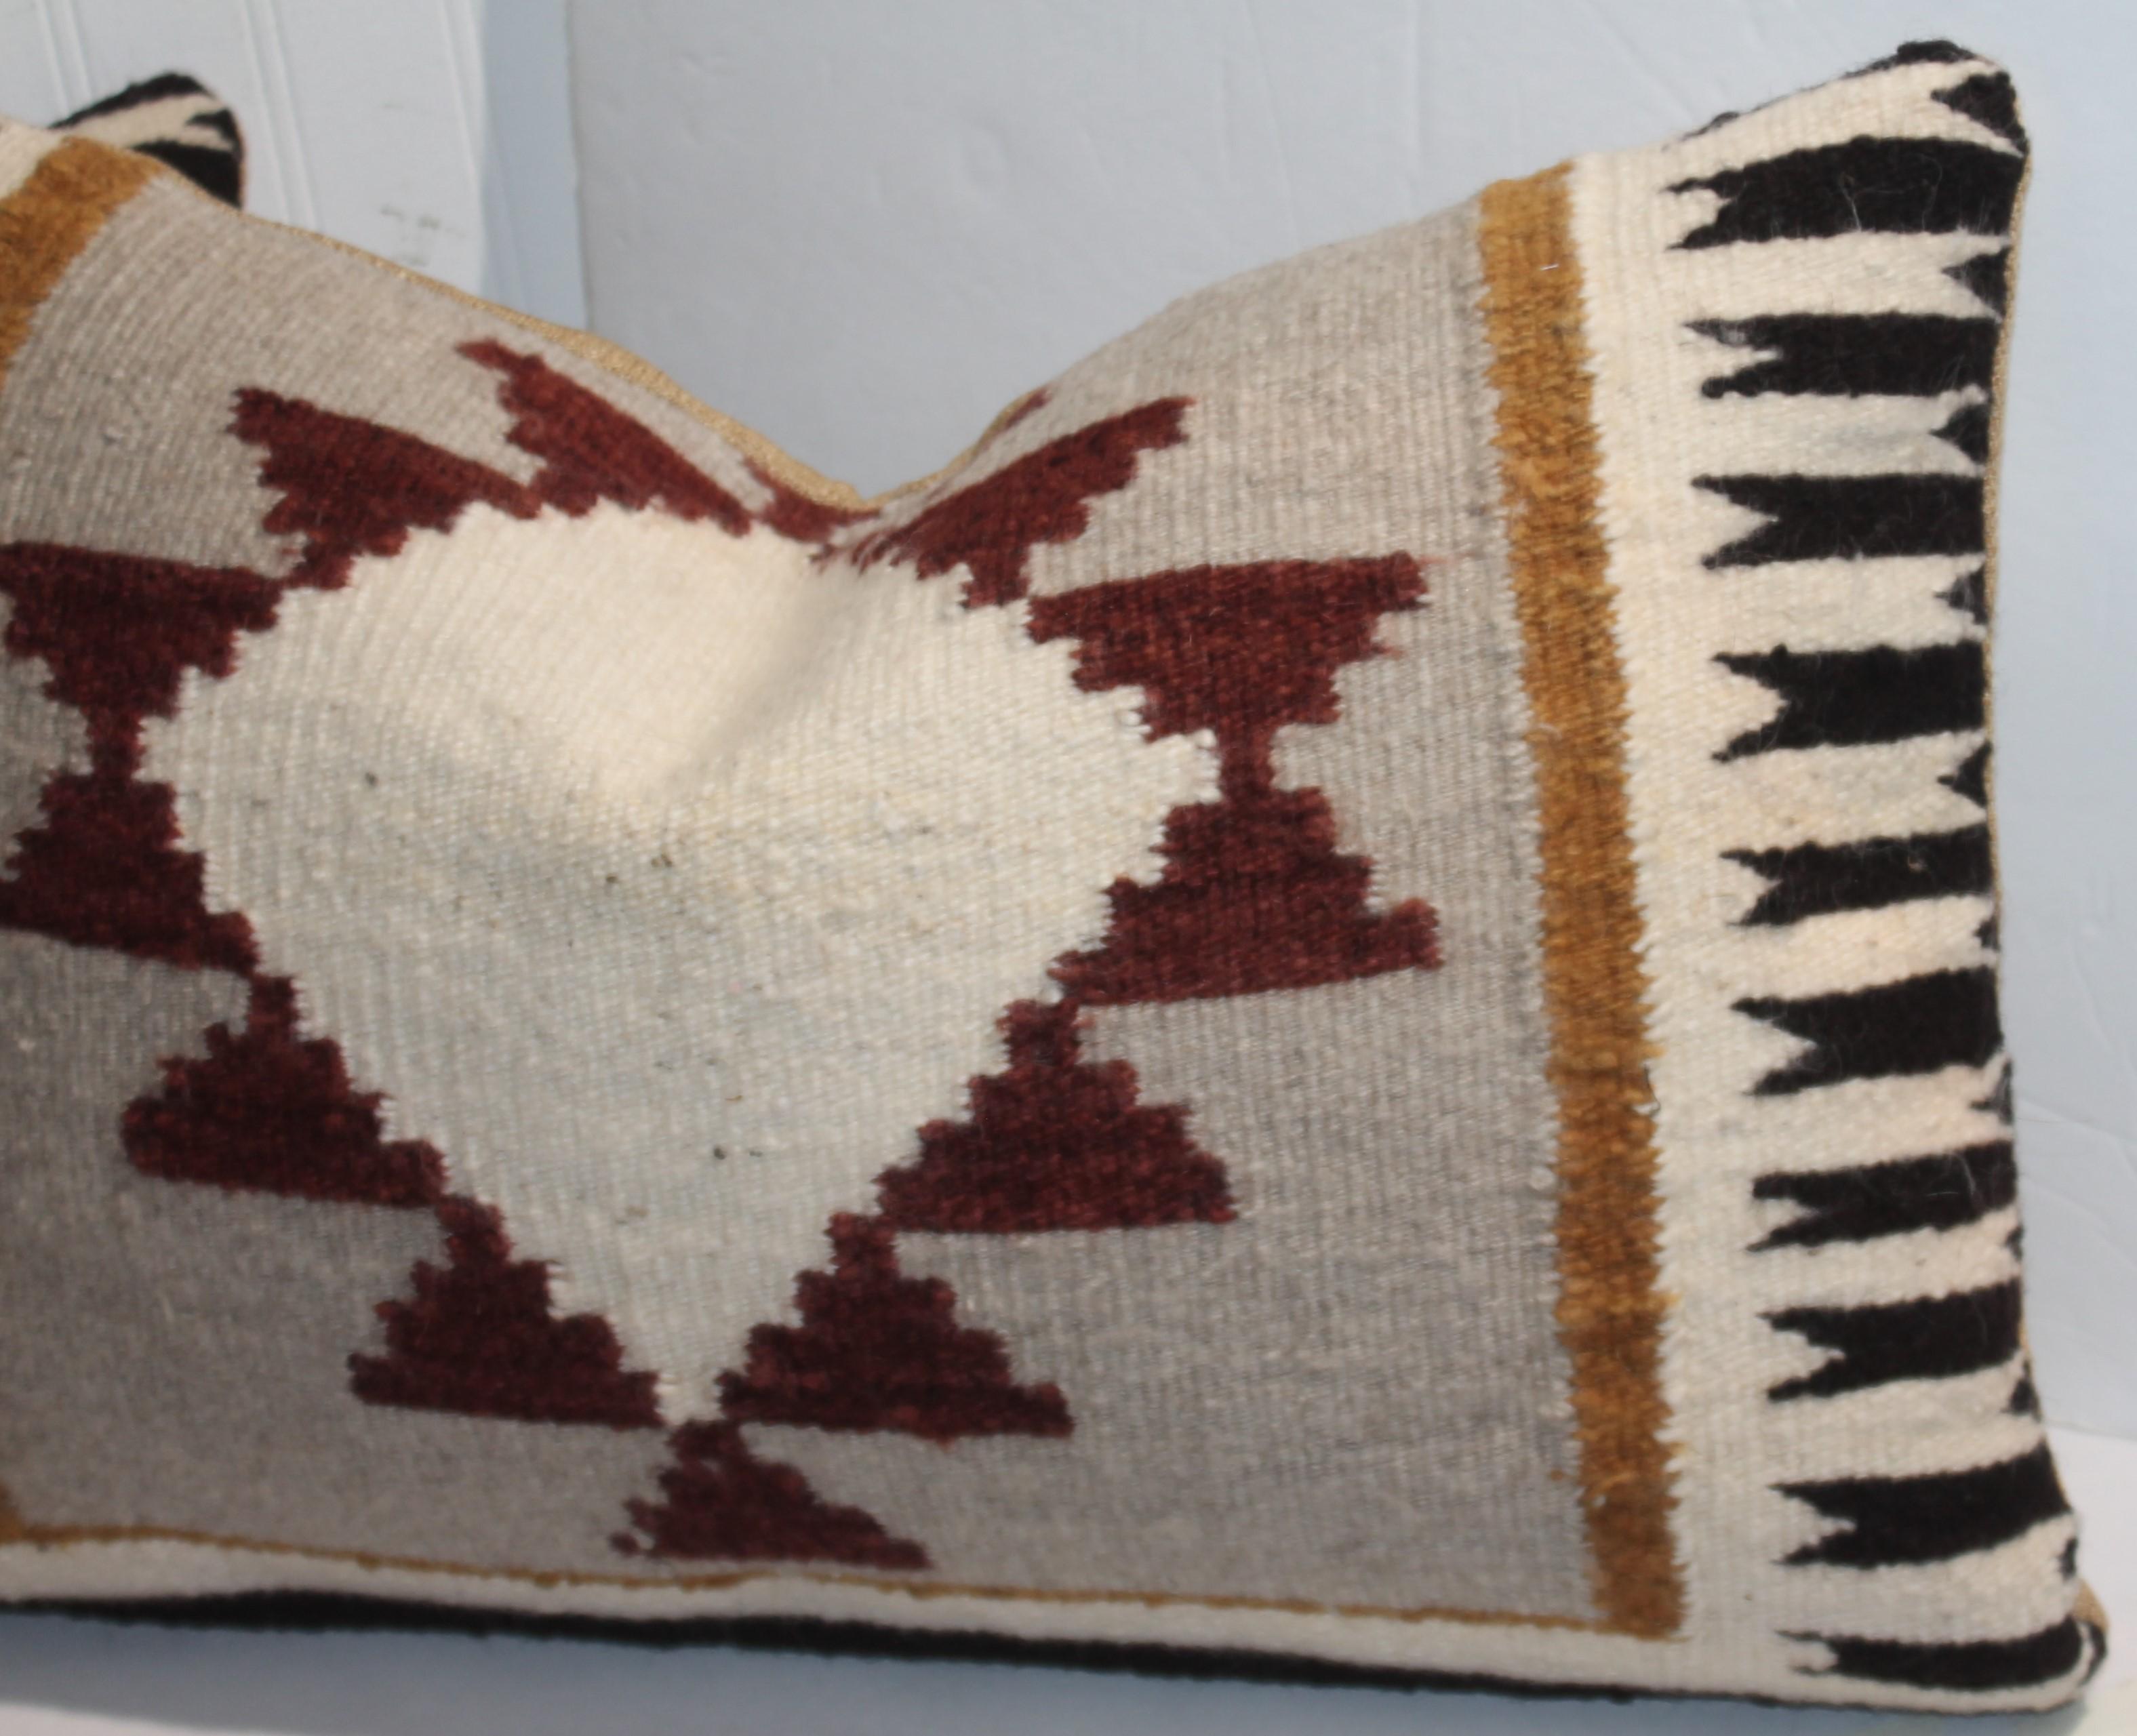 Navajo Indian eye dazzler woven bolster pillows with a great side border design. wonderful colors to the design provide a pleasing aesthetic. Vintage linens backing with custom made down and feather inserts.